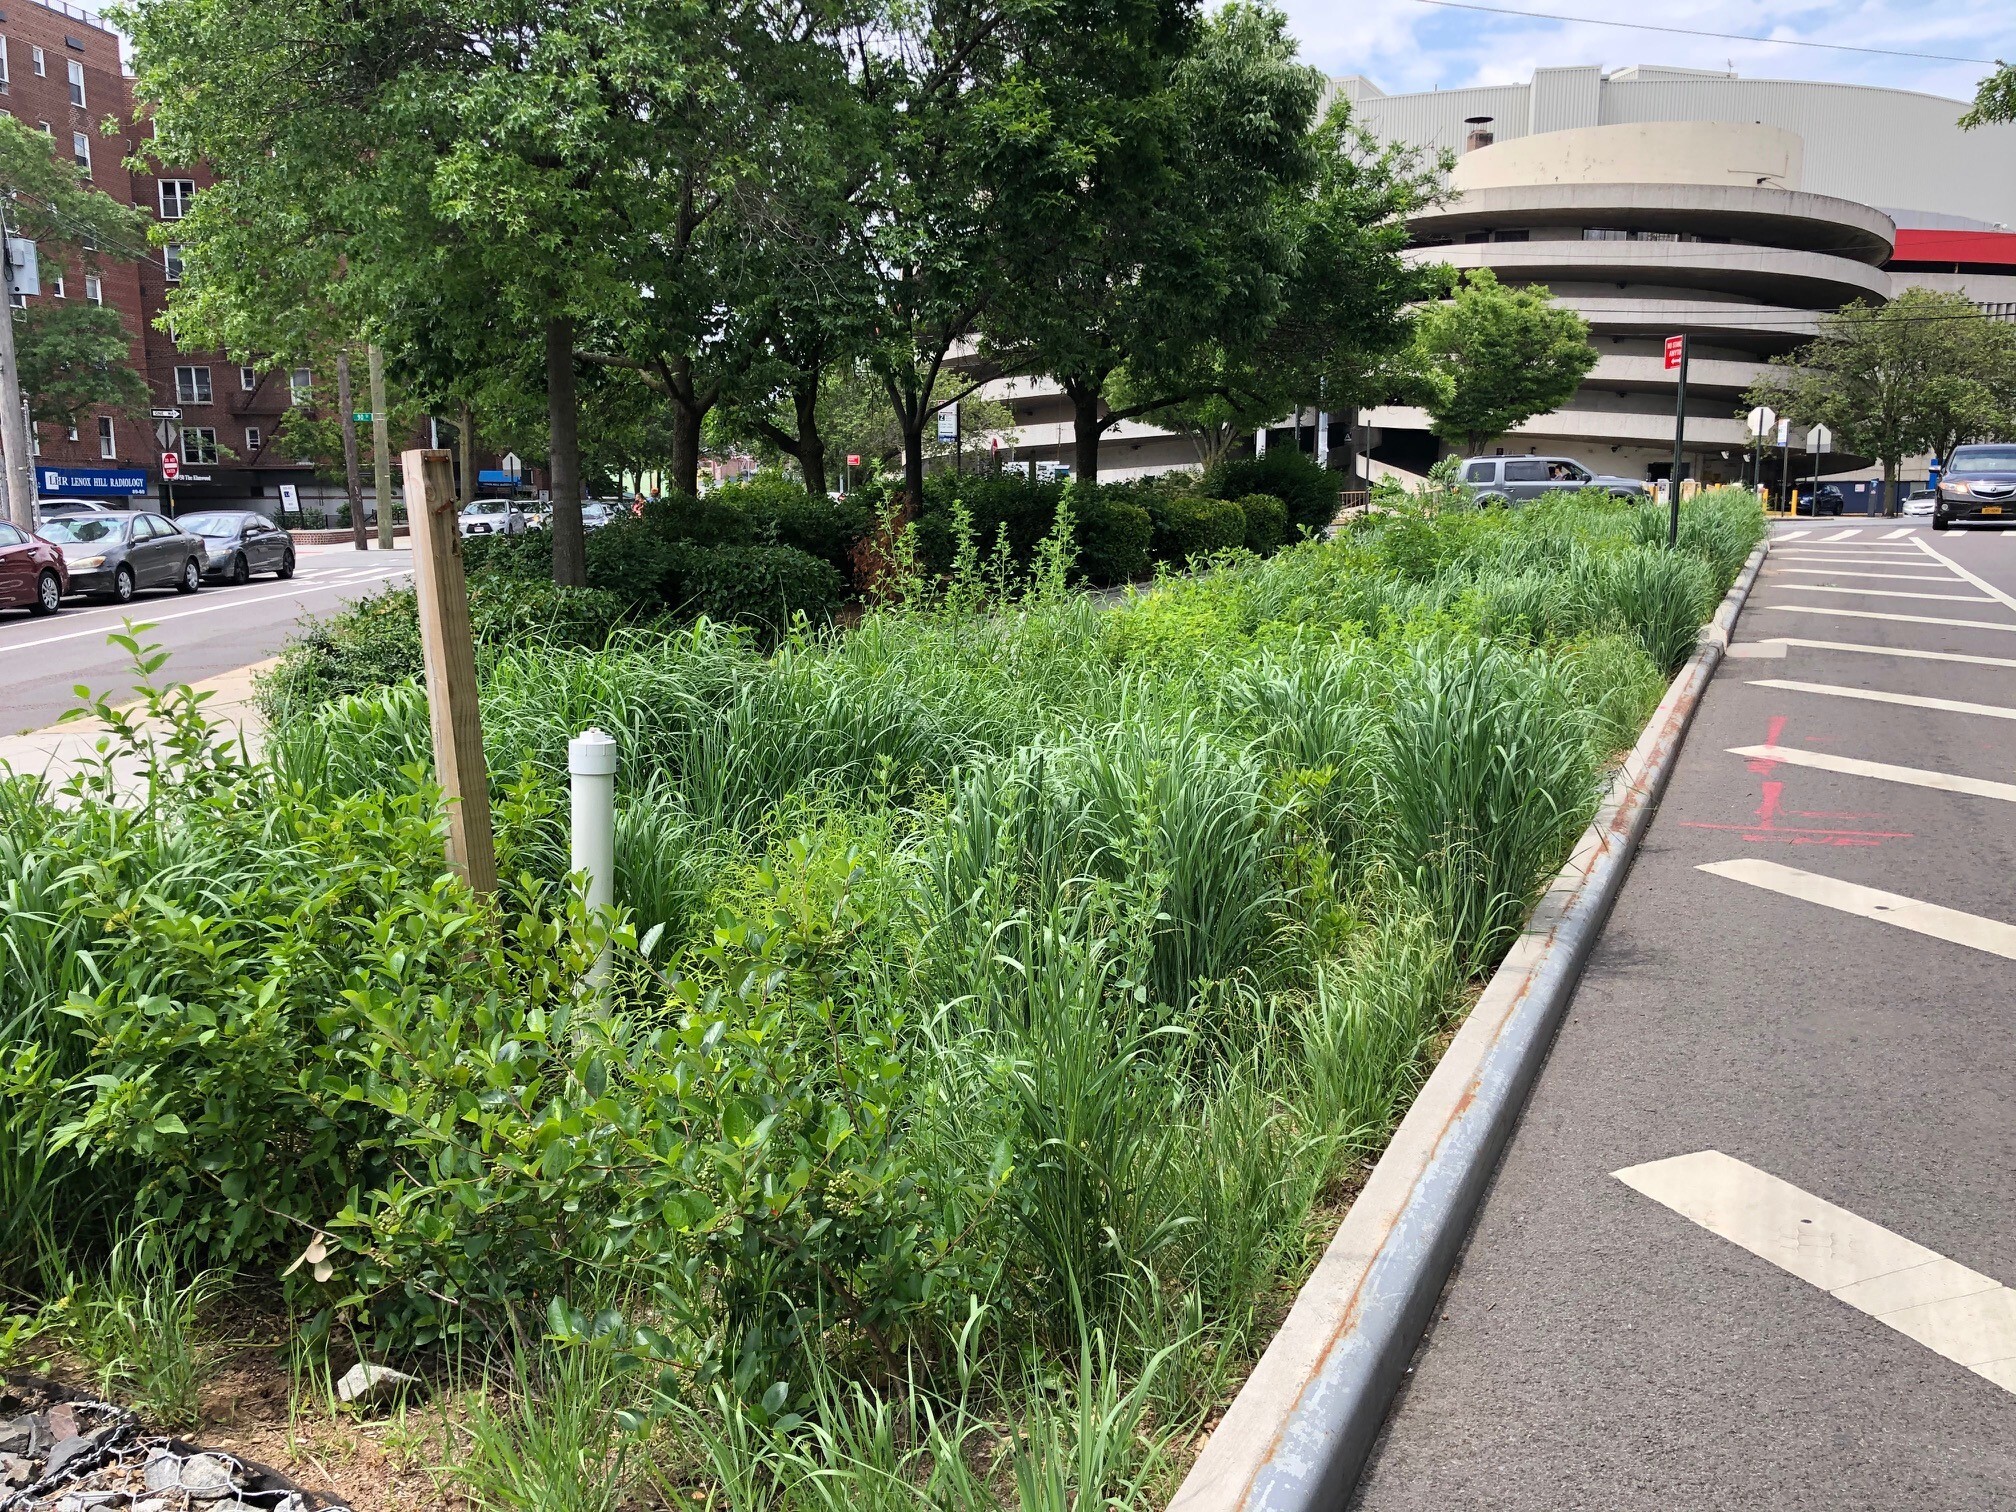 The Justice Avenue Bioswale incorporates native plants, mimicking natural conditions and flowering throughout the growing seasons, and provides benefits for pollinators, birds, and humans—all while capturing stormwater. Photo: NYC Audubon